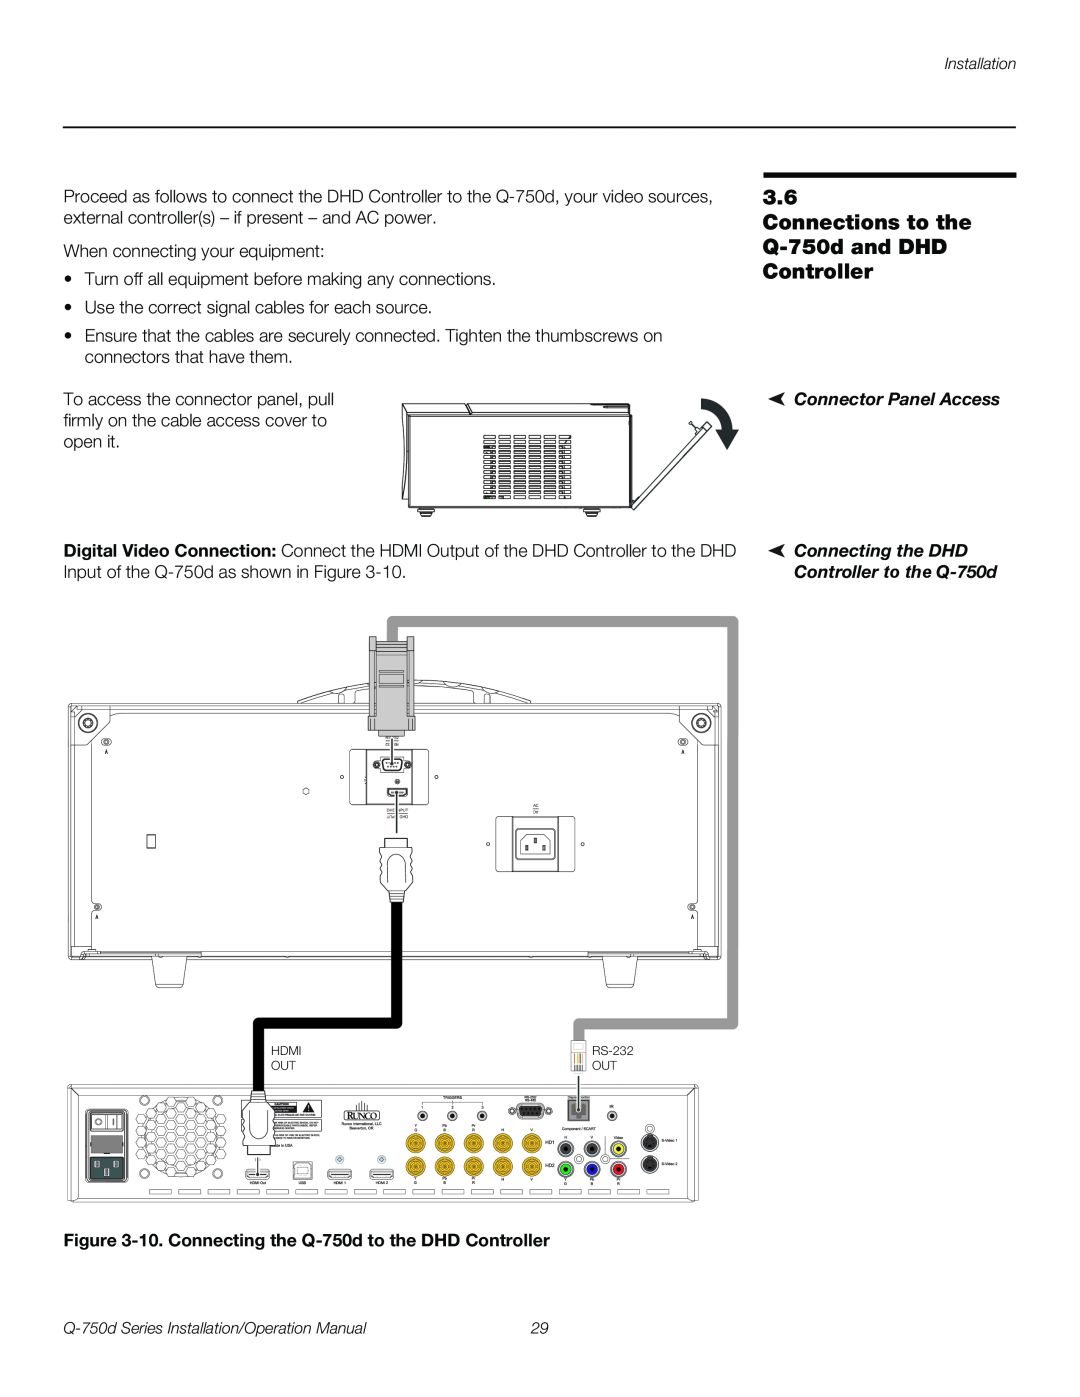 Runco Q-750D operation manual Connections to the Q-750dand DHD Controller, Connector Panel Access 